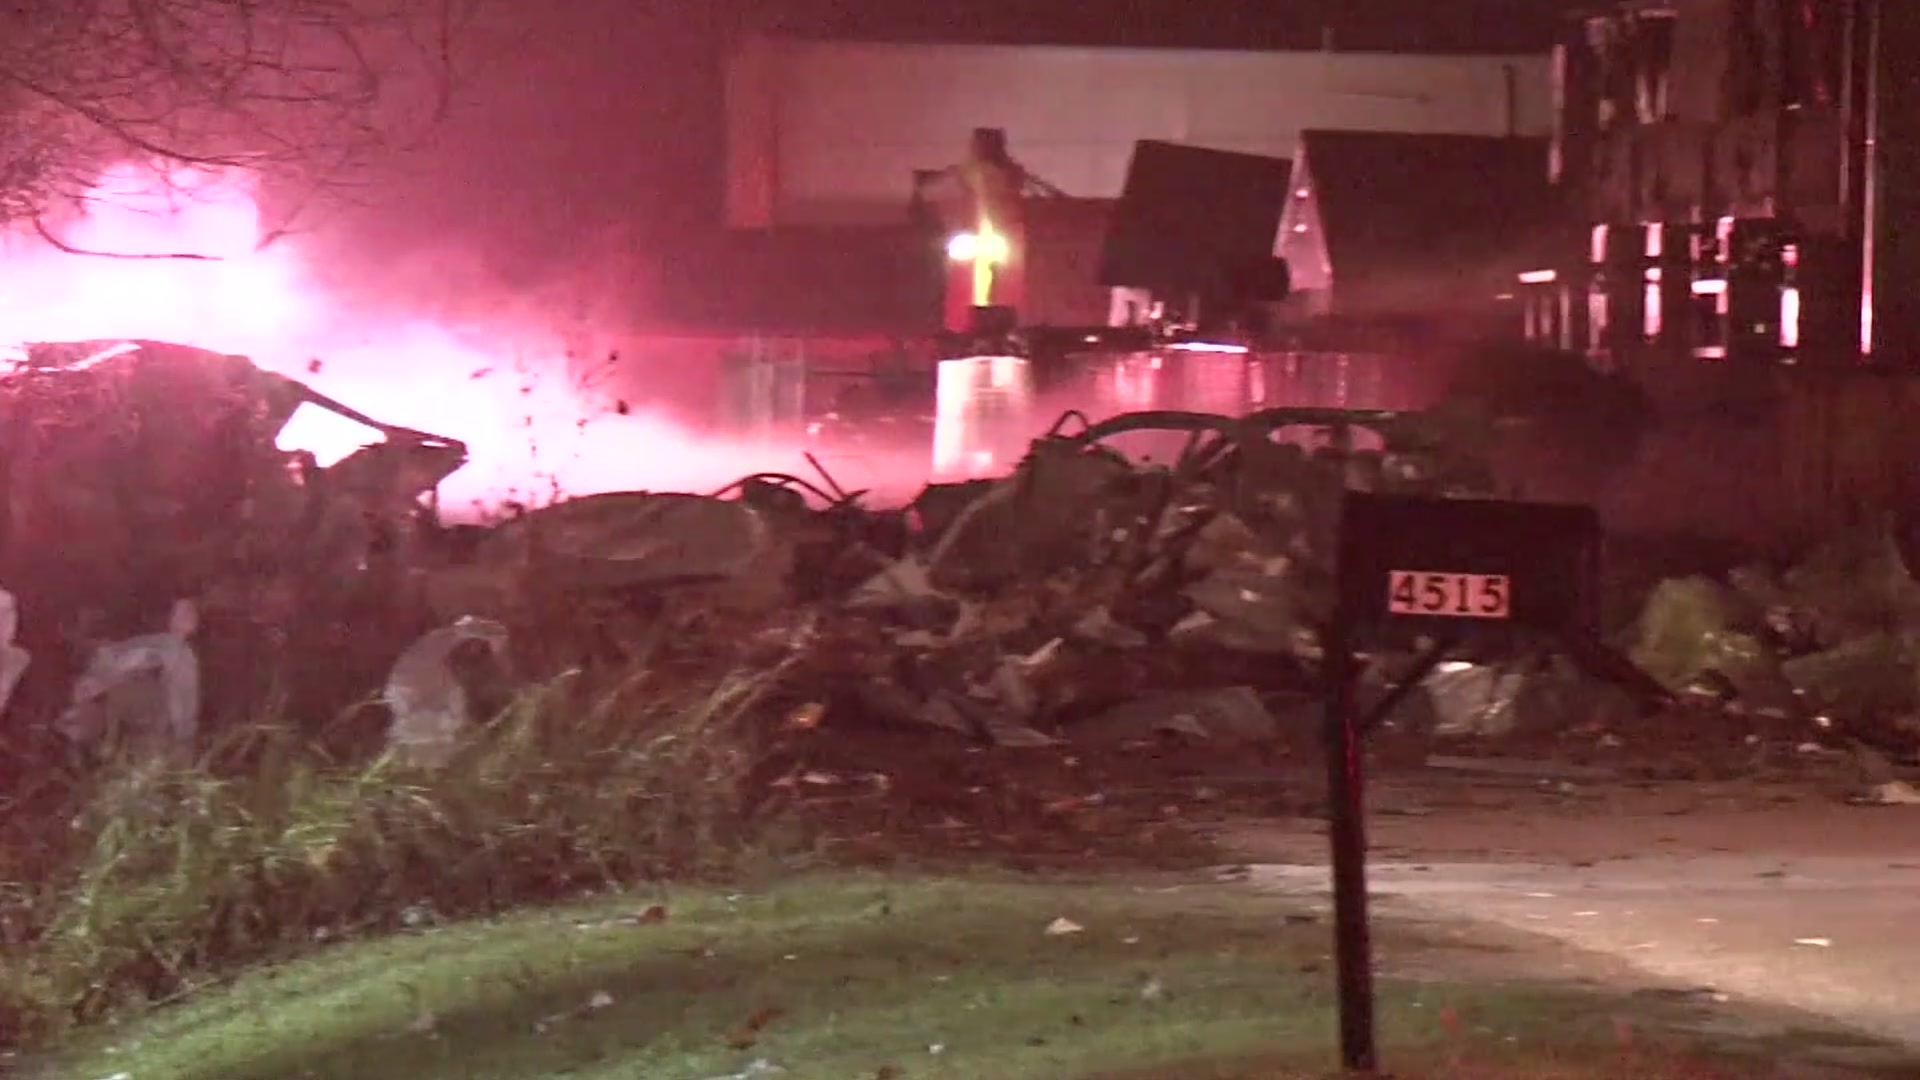 Gallery: Large Explosion Reported at Building in Houston – NBC 5 Dallas-Fort Worth1920 x 1080